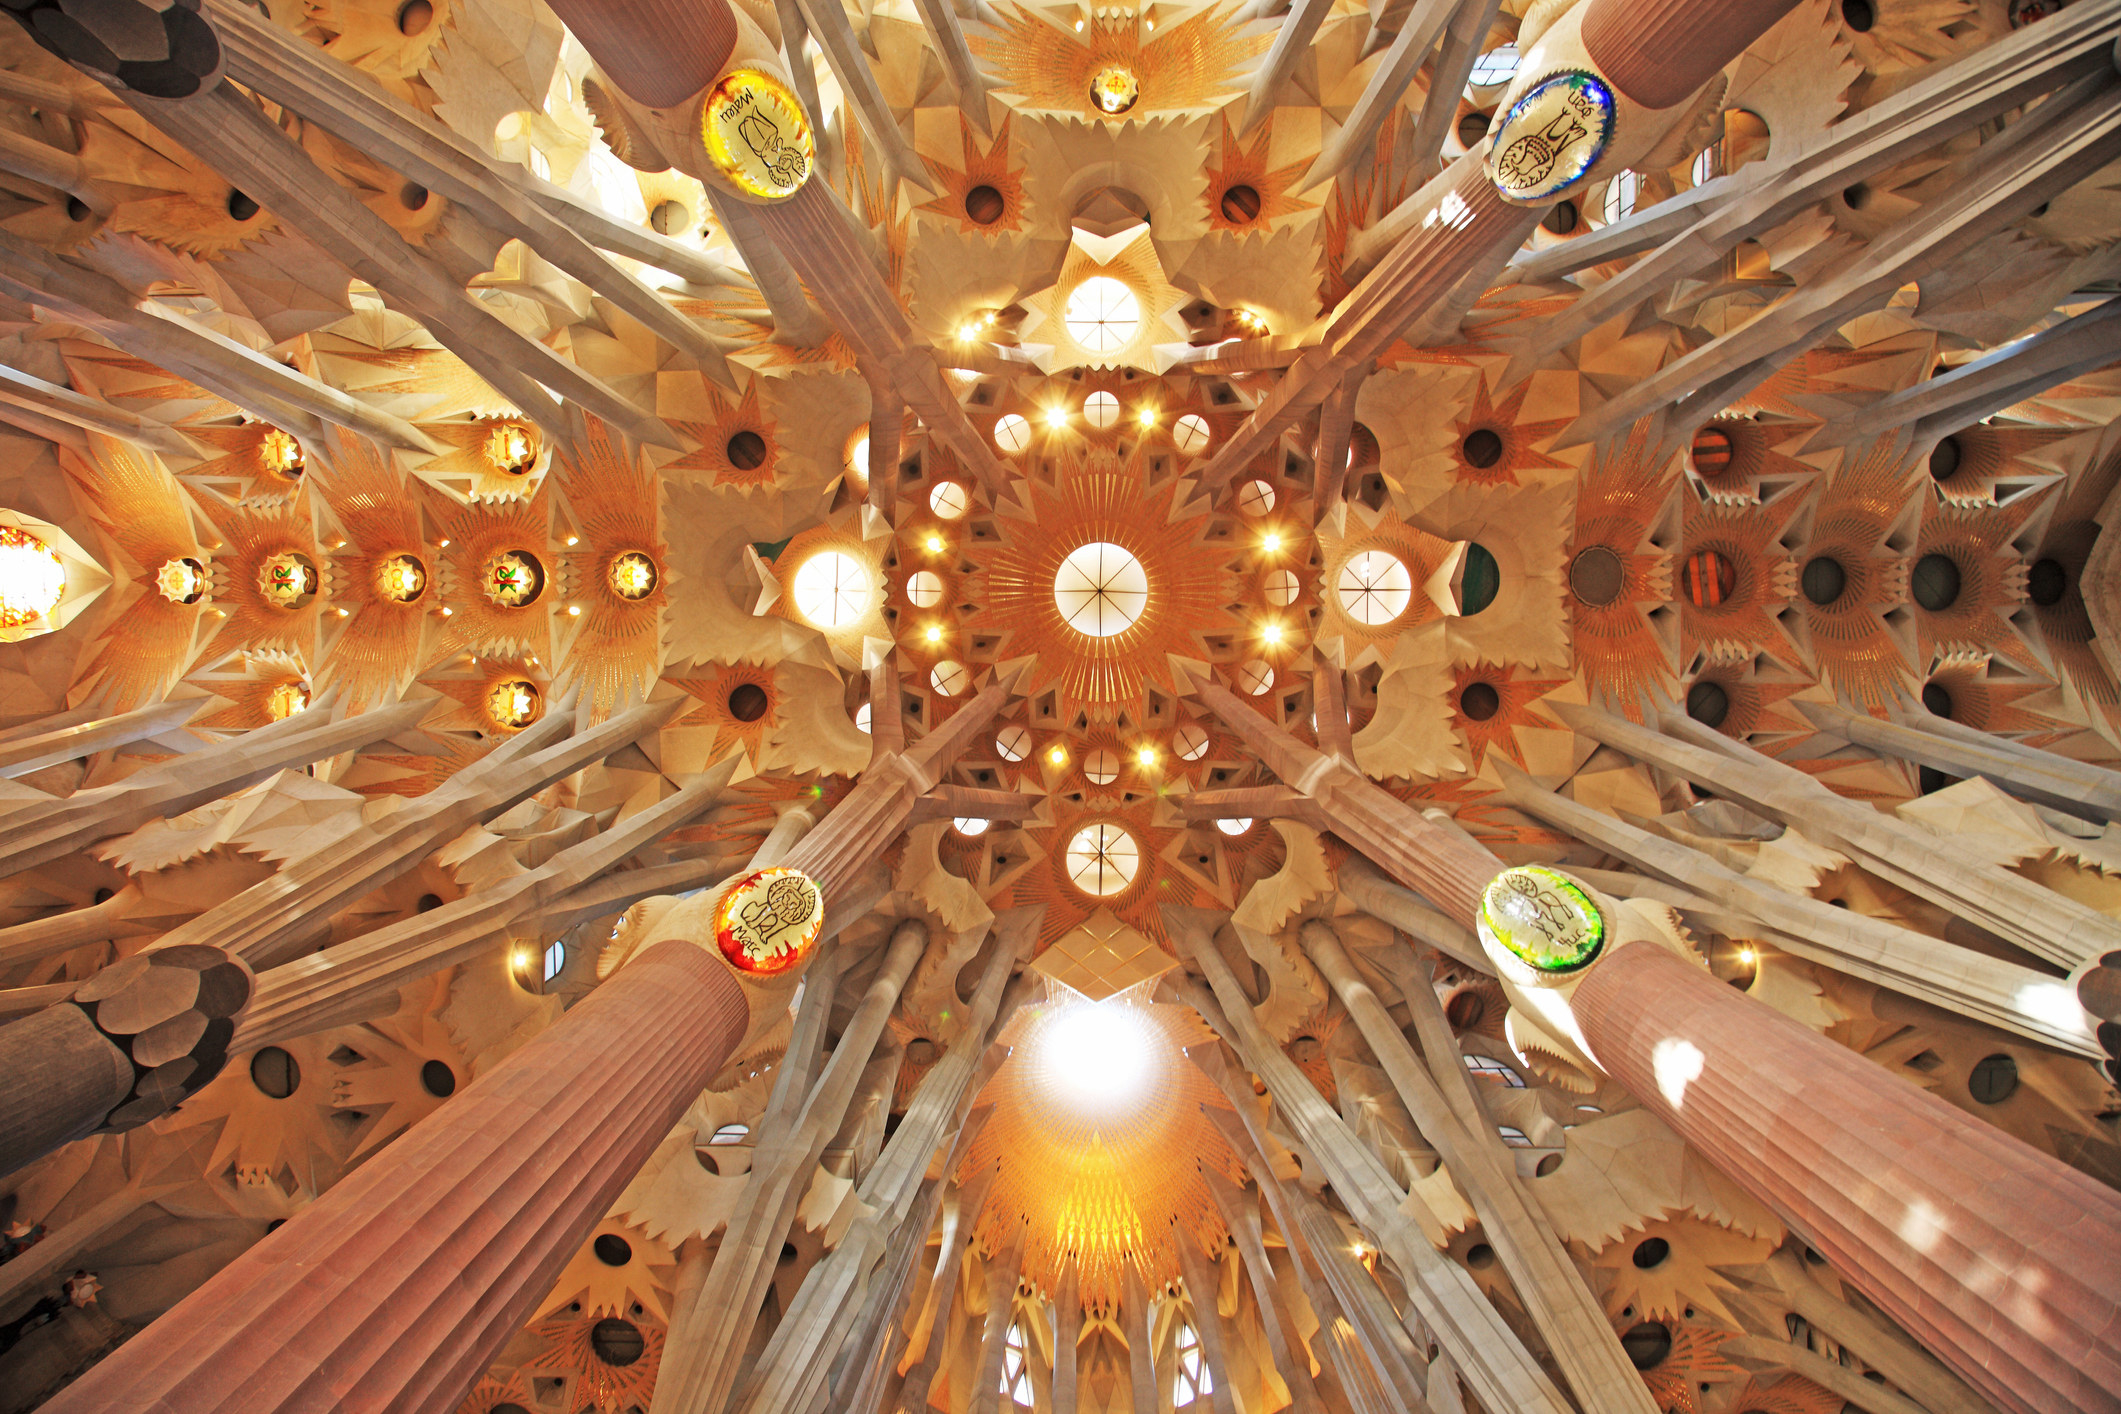 The ceiling of the Sagrada Familia Cathedral.